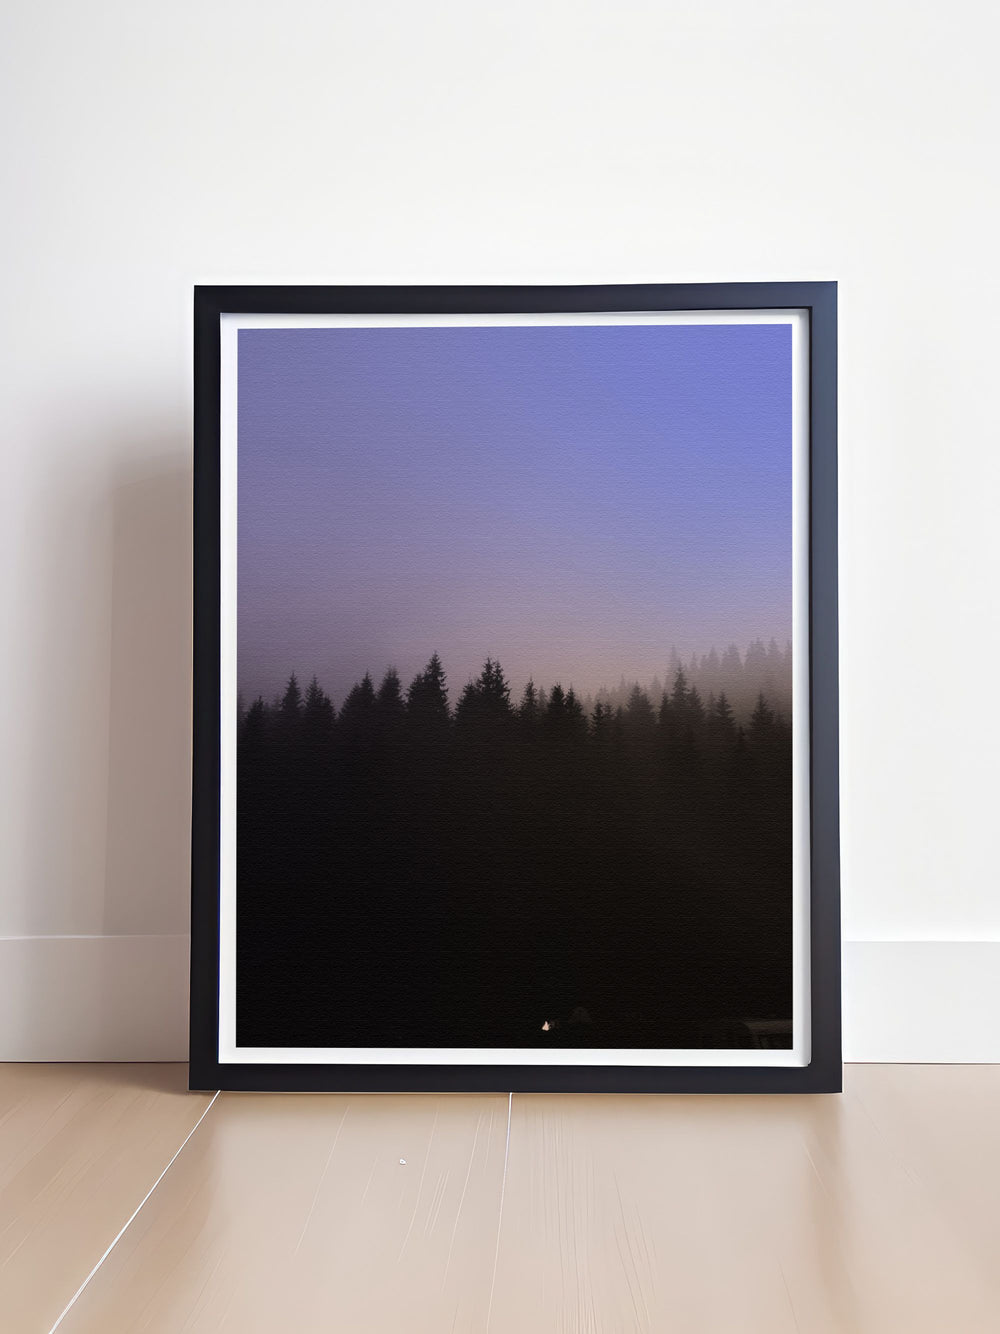 Travel art showcasing the beauty of a foggy forest, highlighting the enchanting and tranquil atmosphere of natures misty landscapes.